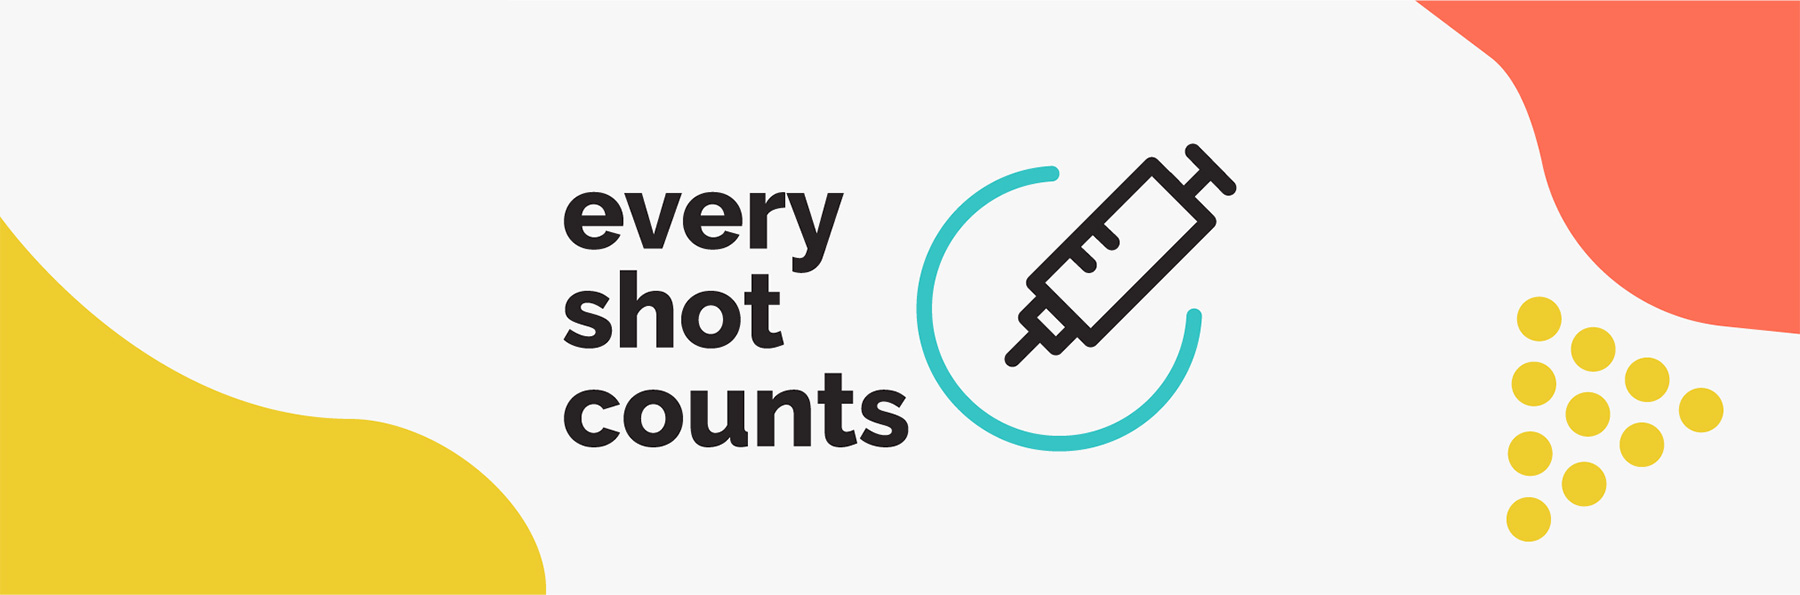 Every Shot Counts Web Banner